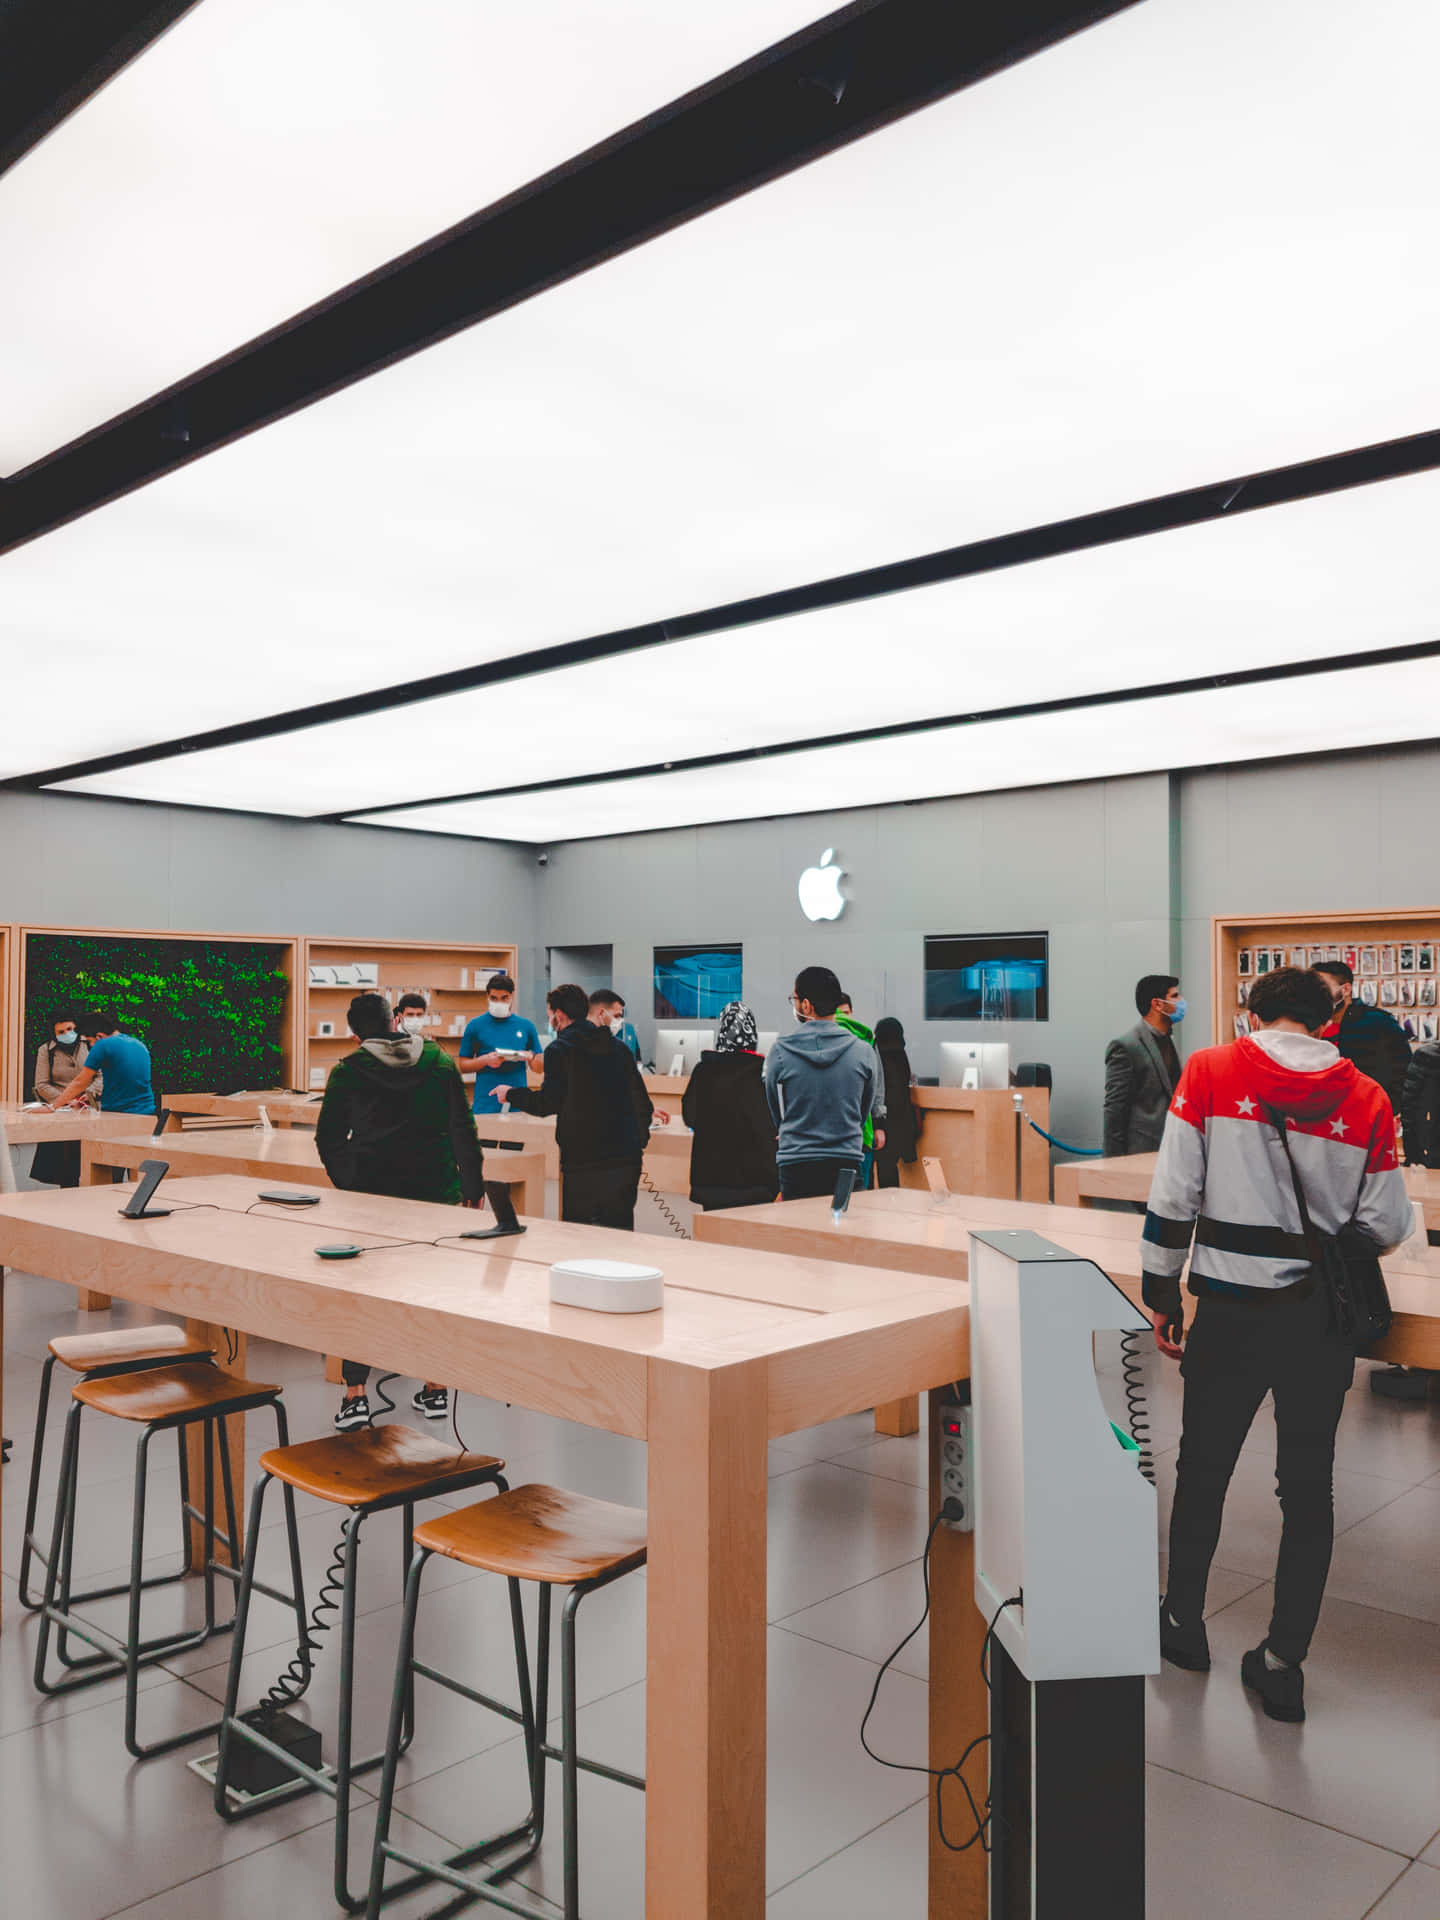 Apple Store Interiorwith Customersand Products Wallpaper